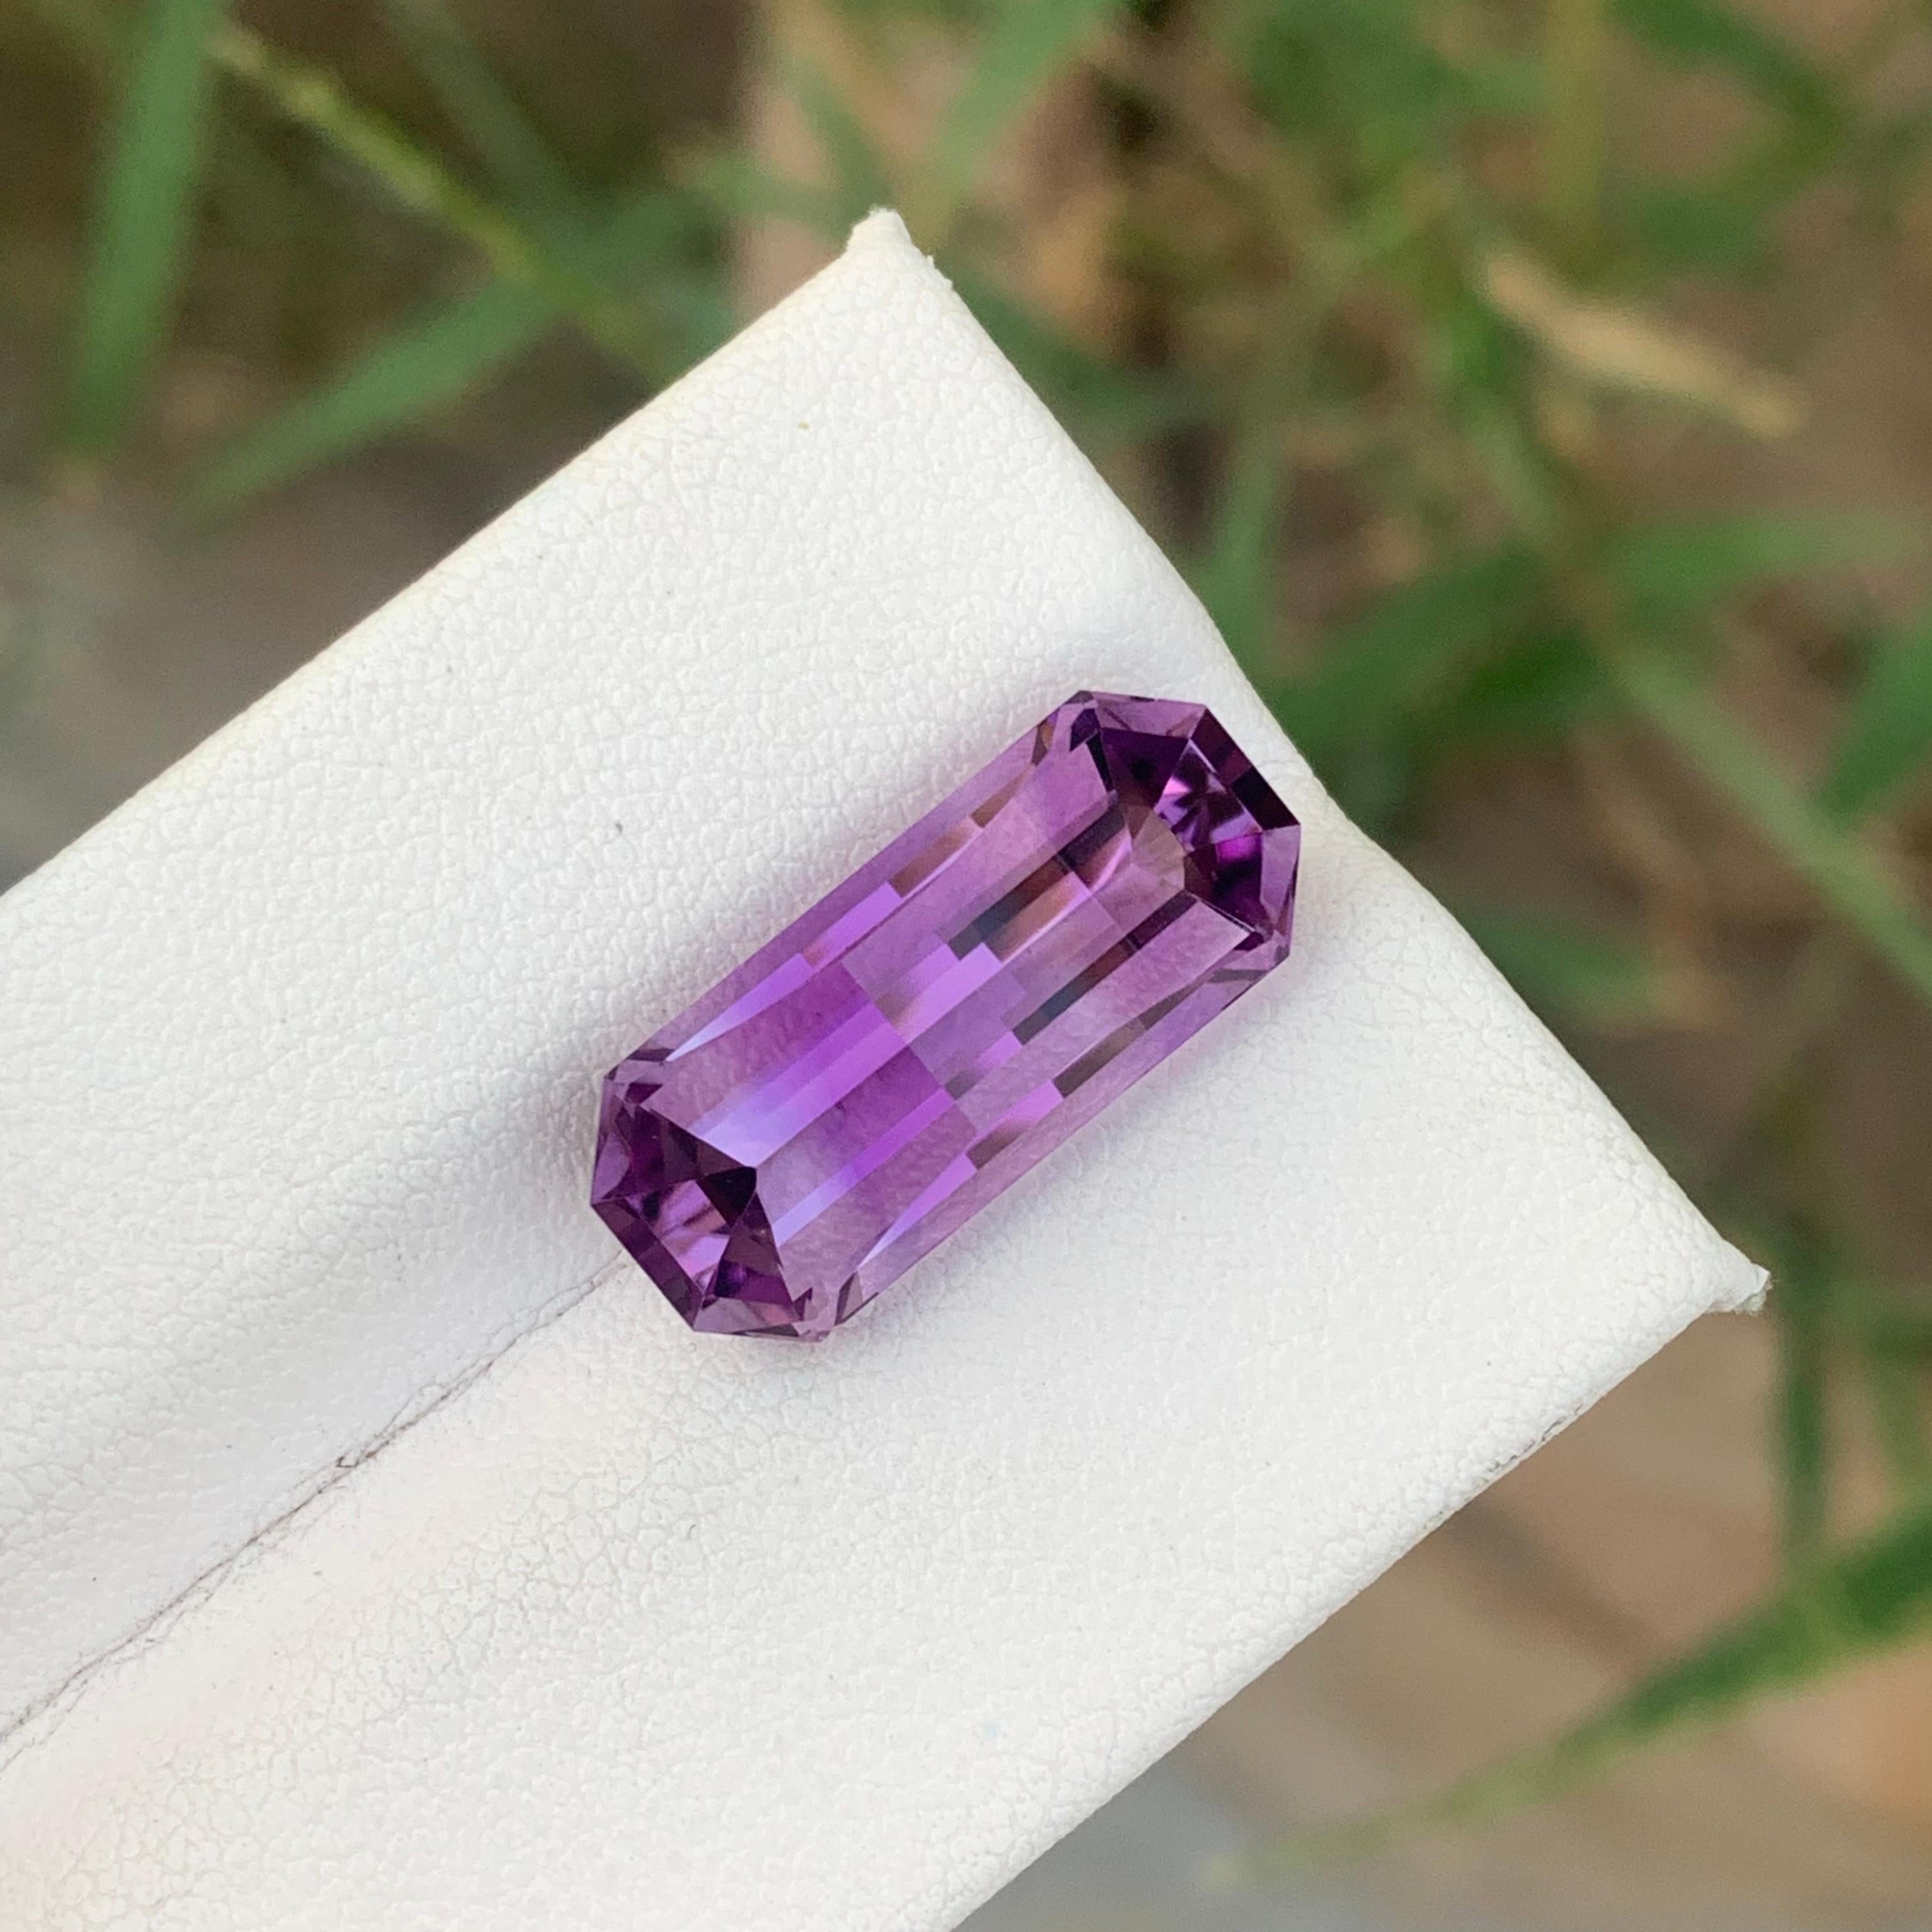 8.25cts Natural Loose Amethyst Gemstone Pixel Pixelated Cut From Brazil Mine For Sale 11